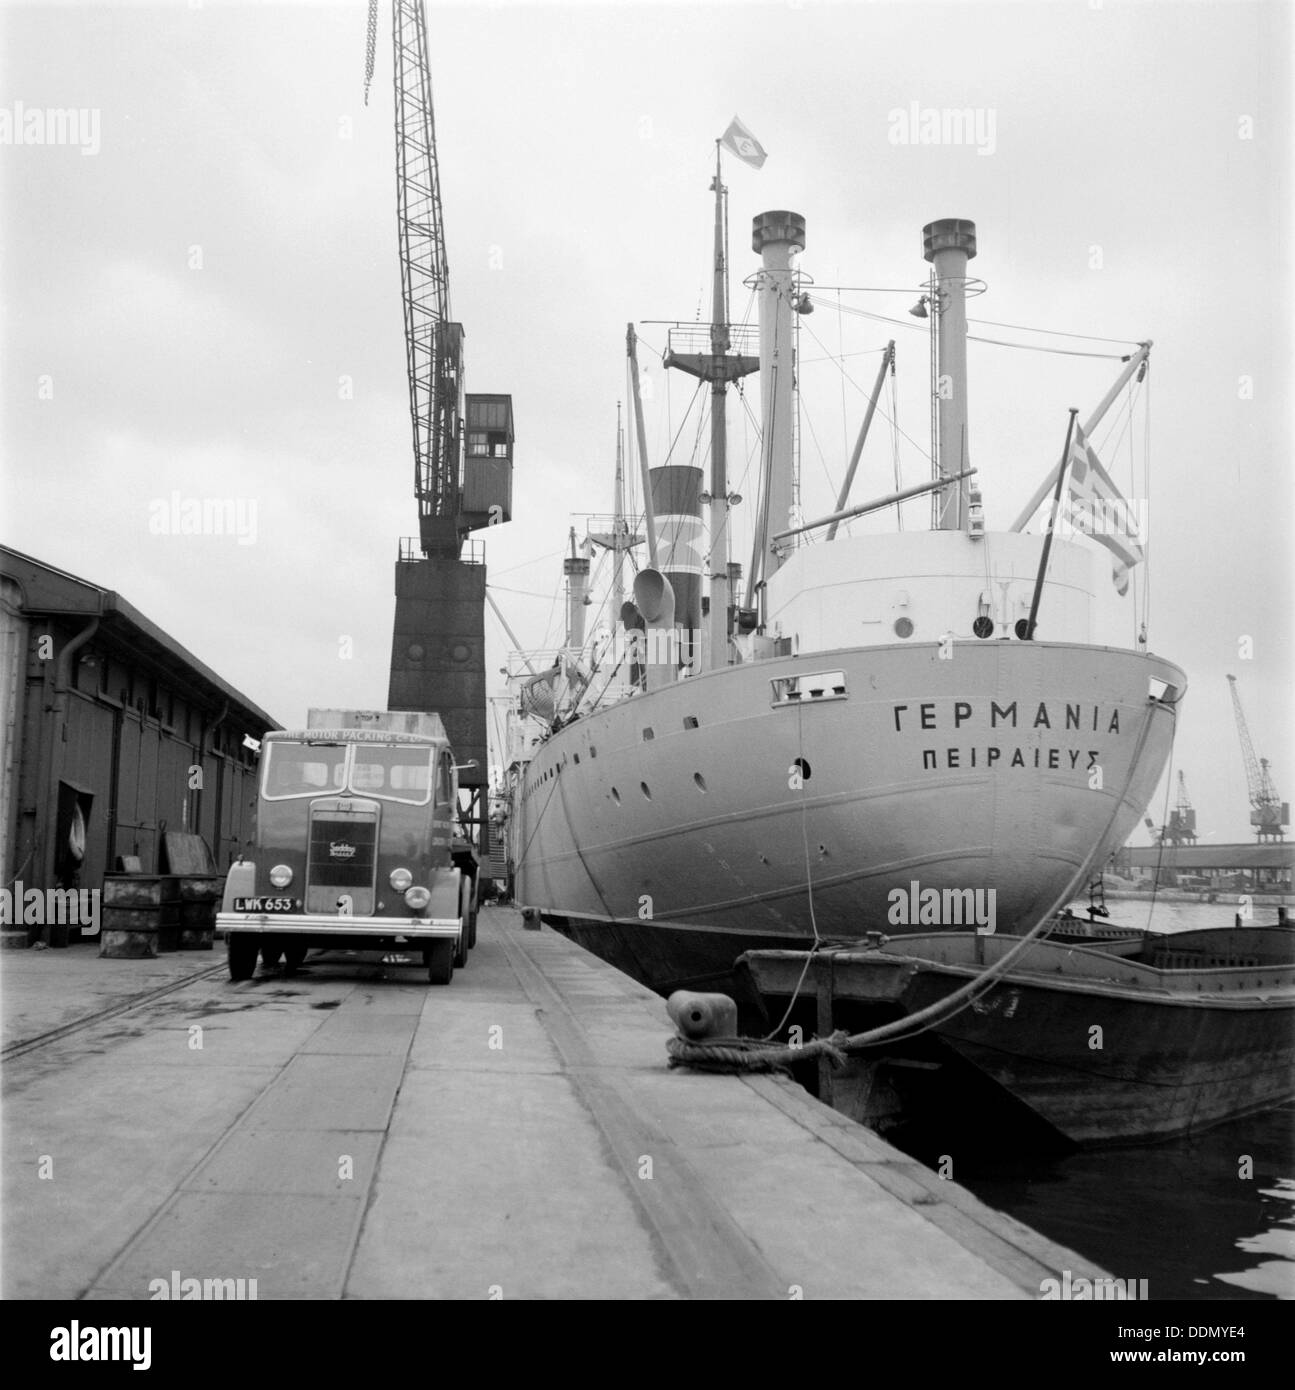 A ship unloading in West India Docks, London, c1945-c1965. Artist: SW Rawlings Stock Photo